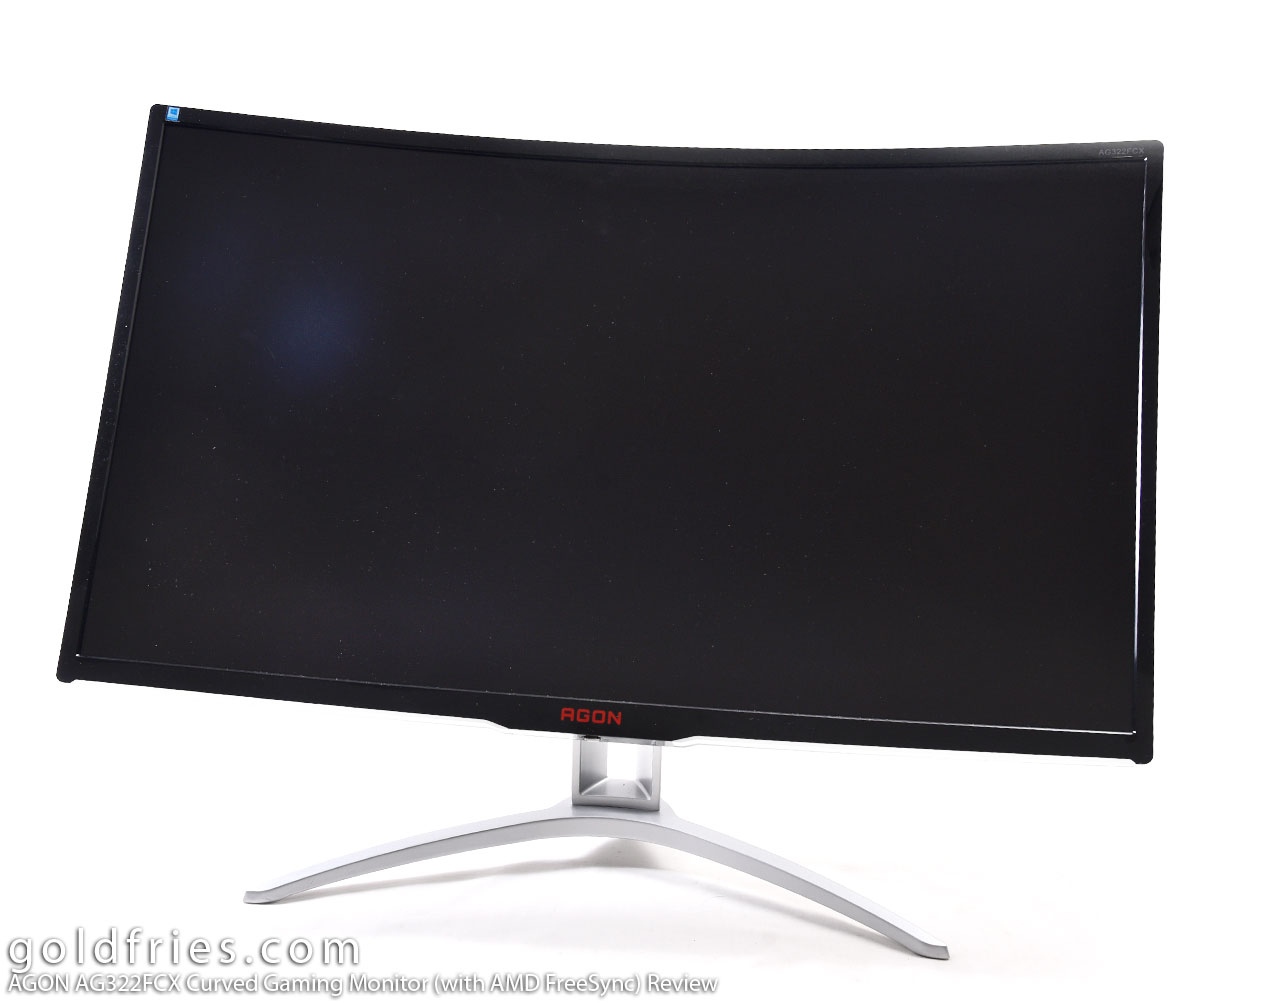 AGON AG322FCX Curved Gaming Monitor (with AMD FreeSync) Review